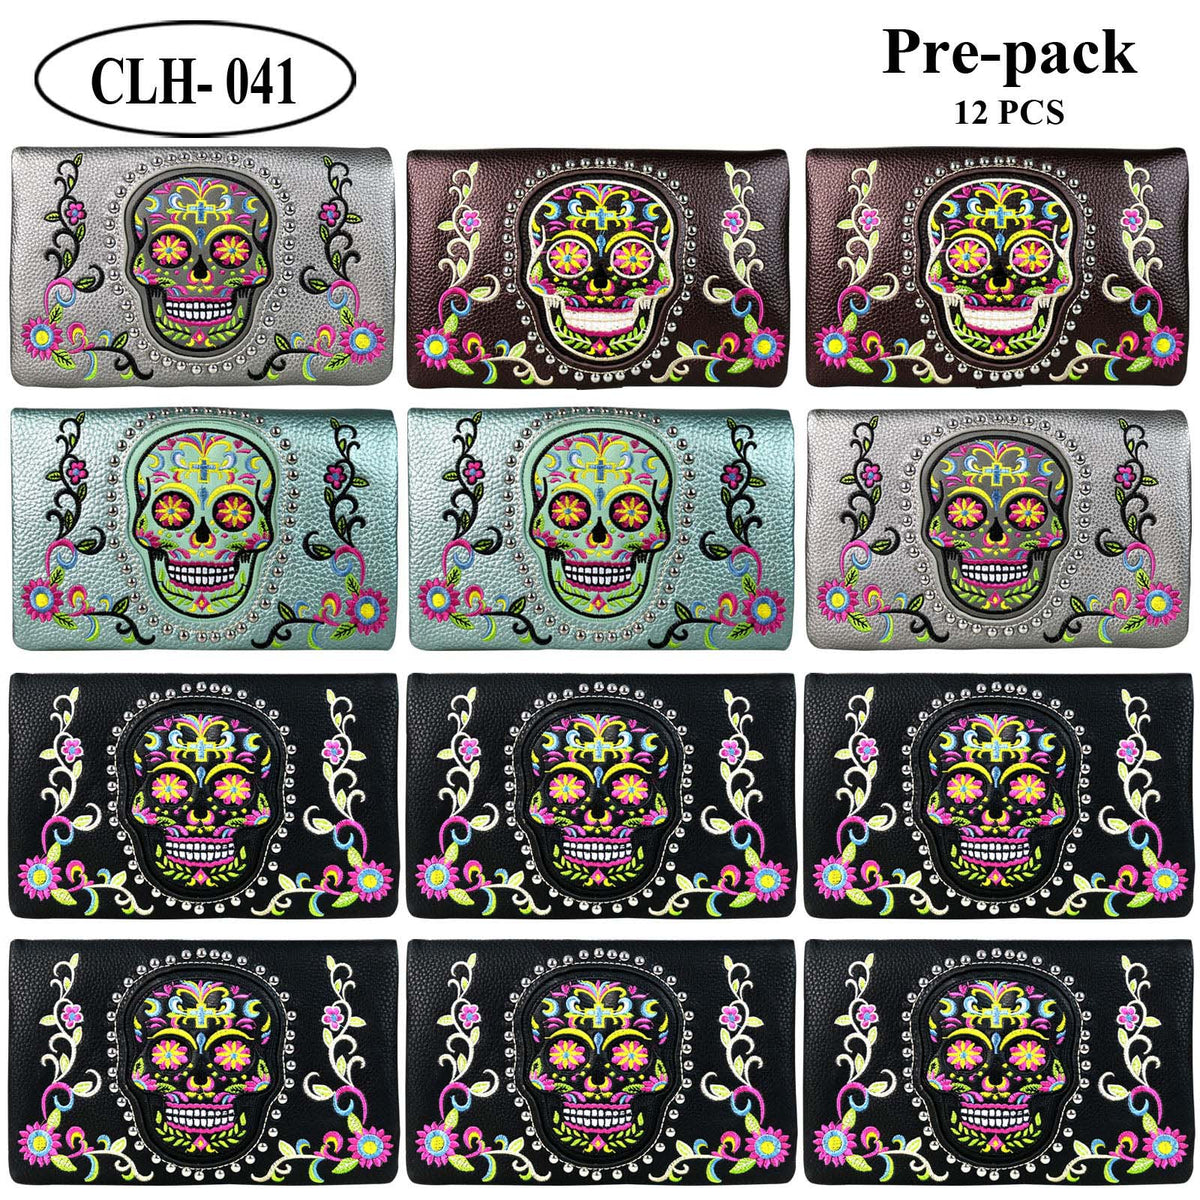 American Bling Sugar Skull Clutch Pre-Pack Assorted Color (12PCS)